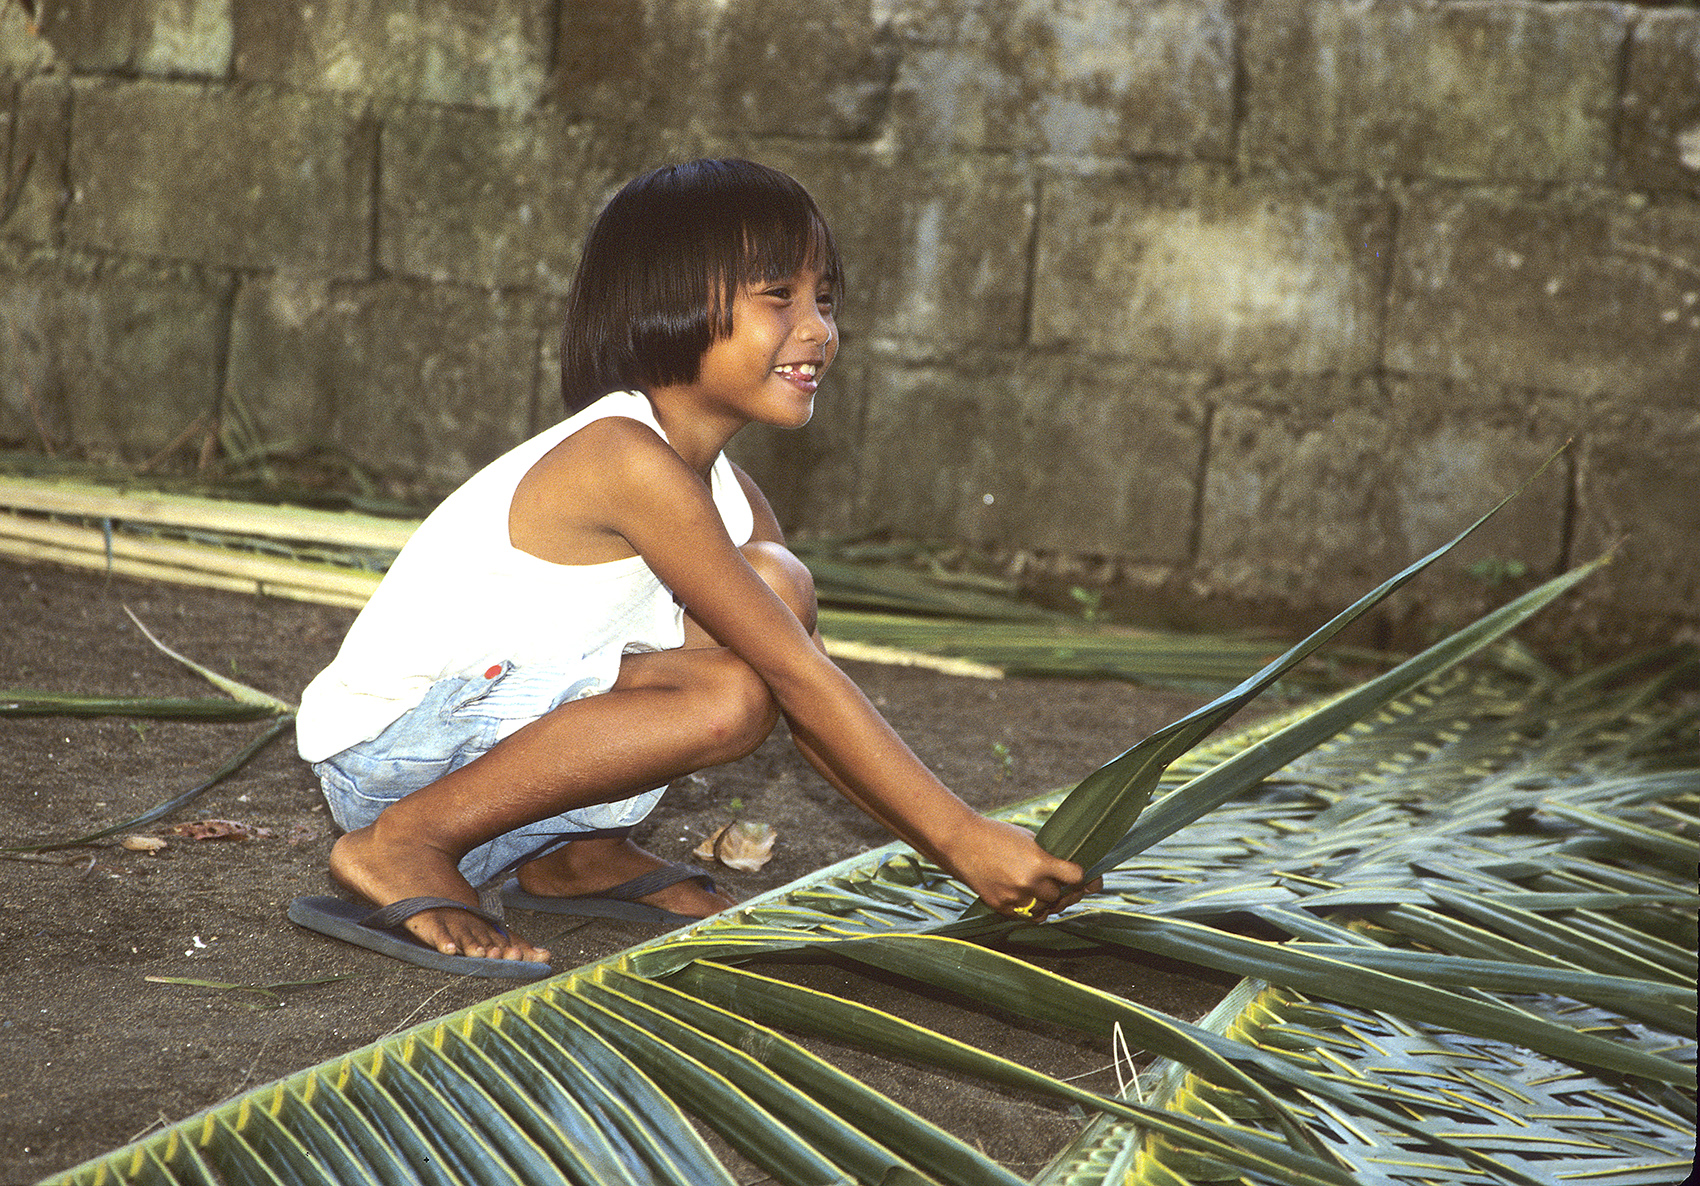 Weaving palm leaves, Philippines